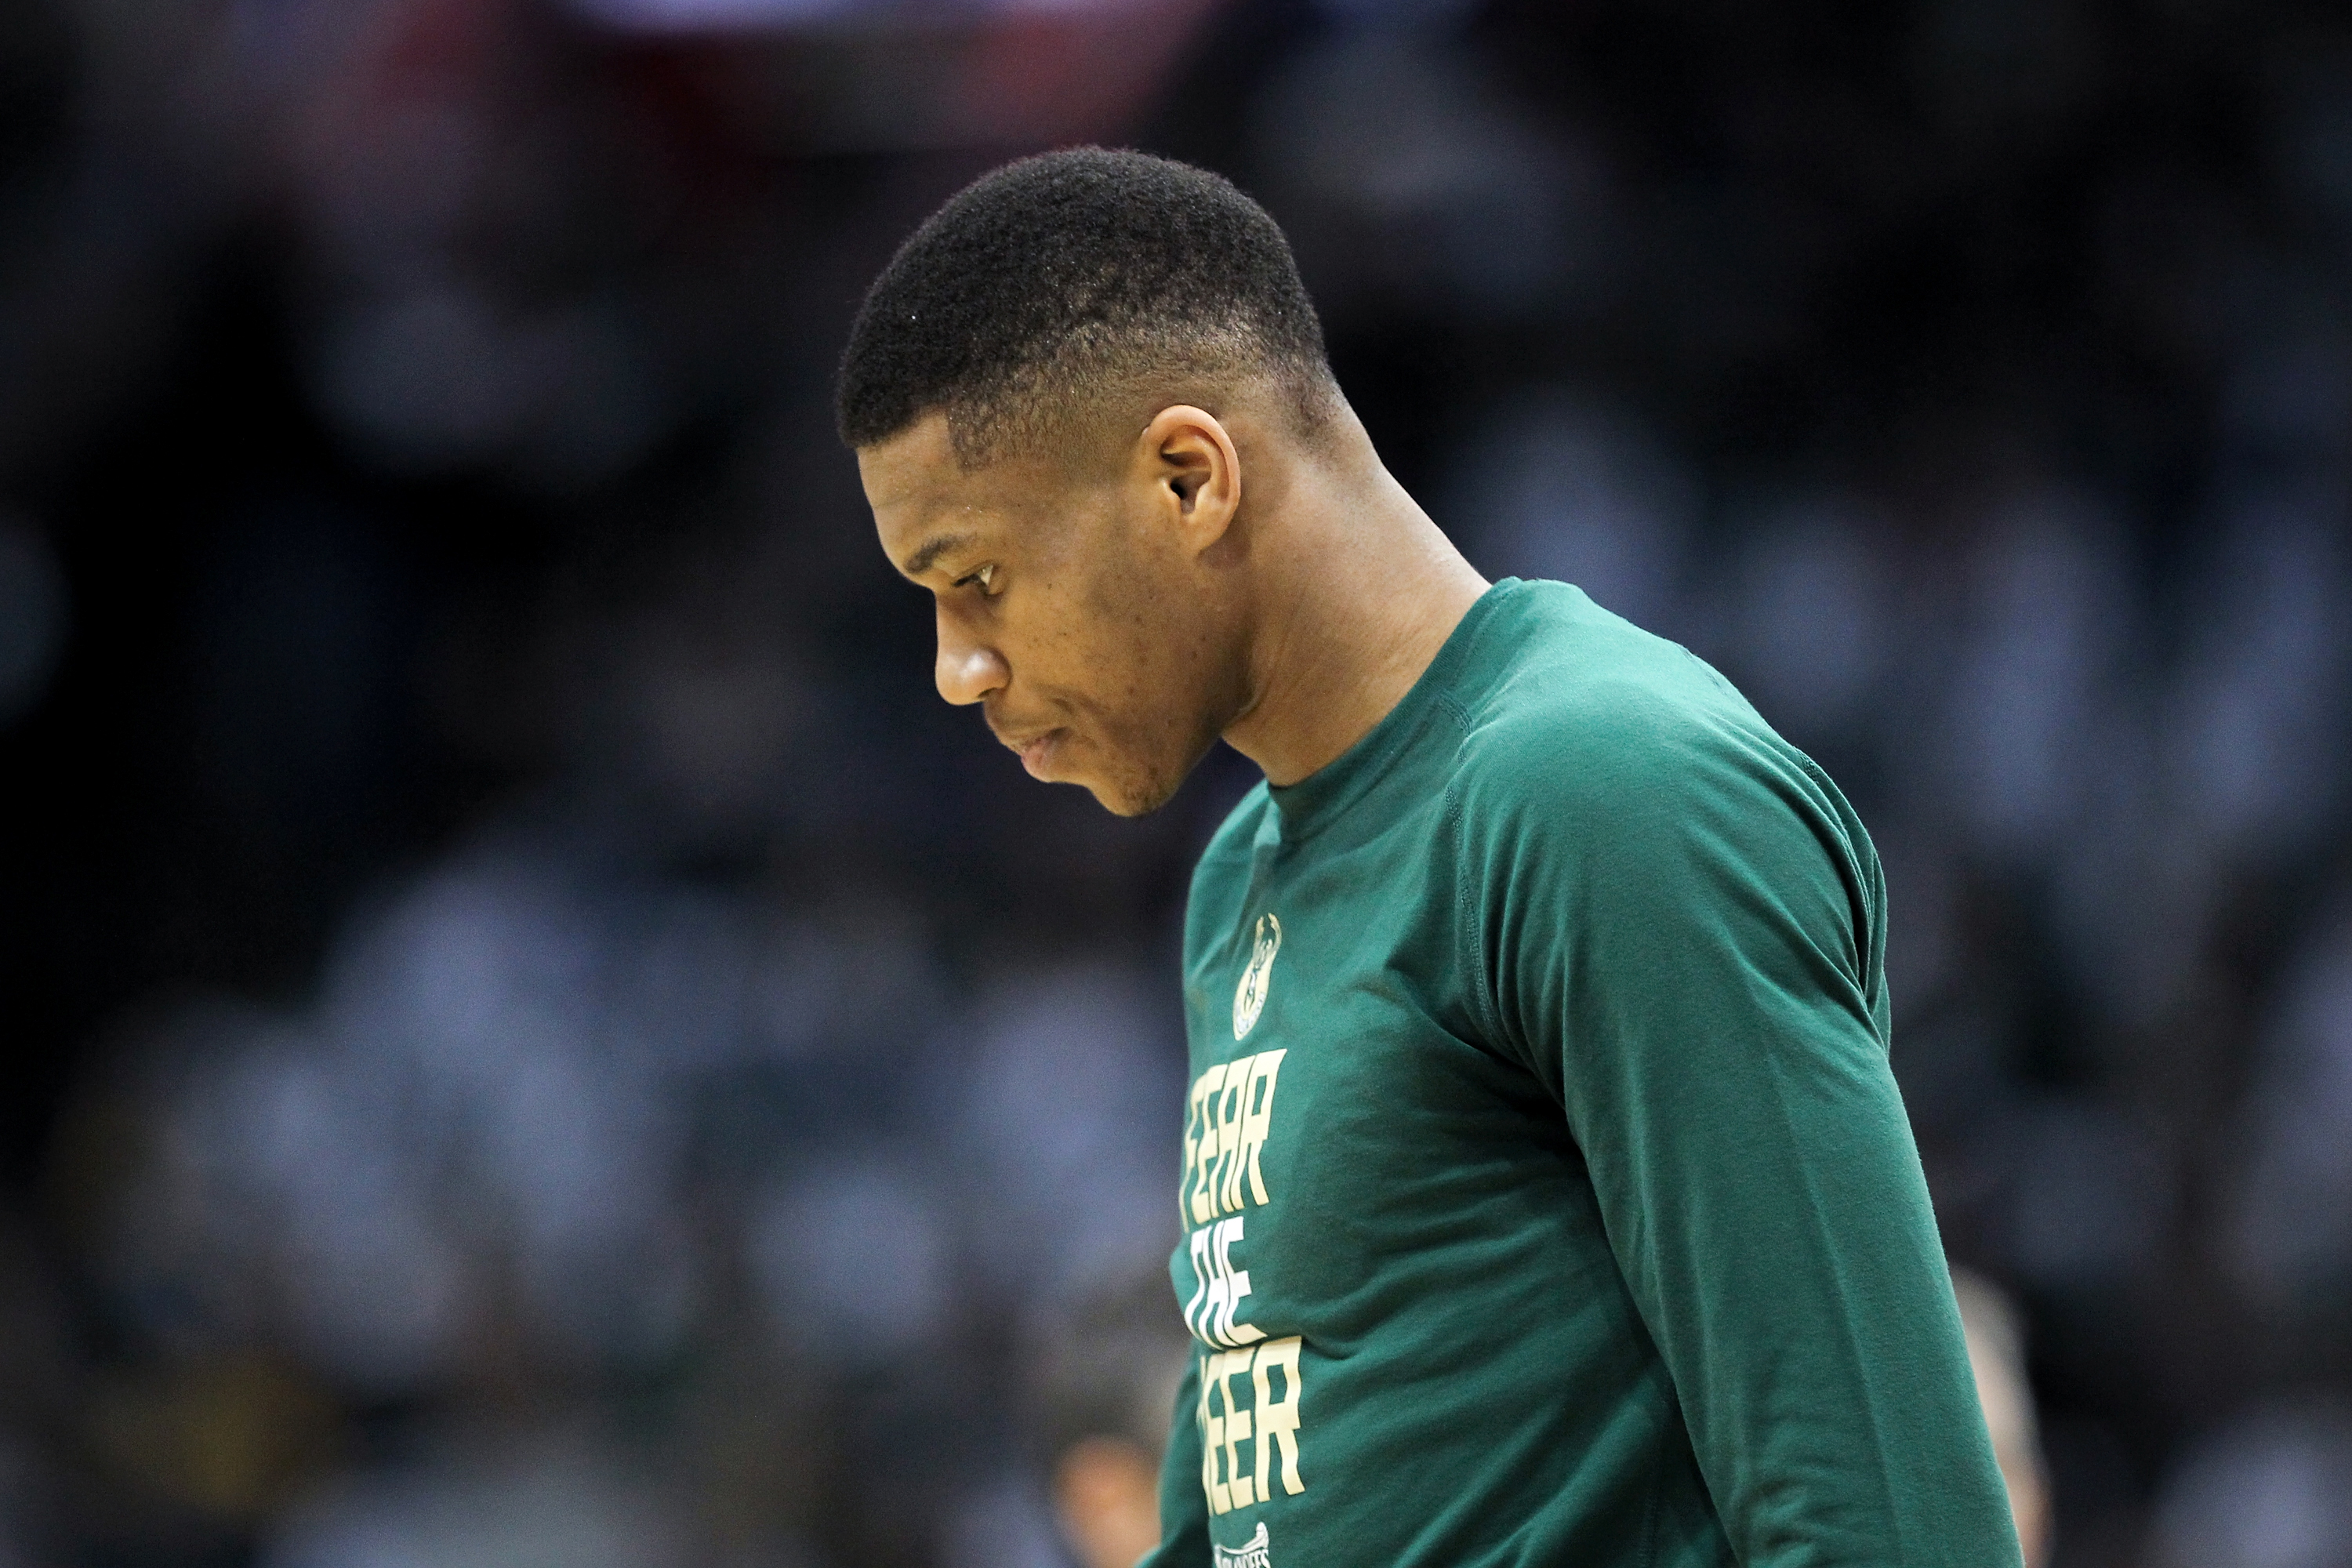 Giannis Antetokounmpo Named to First Team All-NBA - Brew Hoop